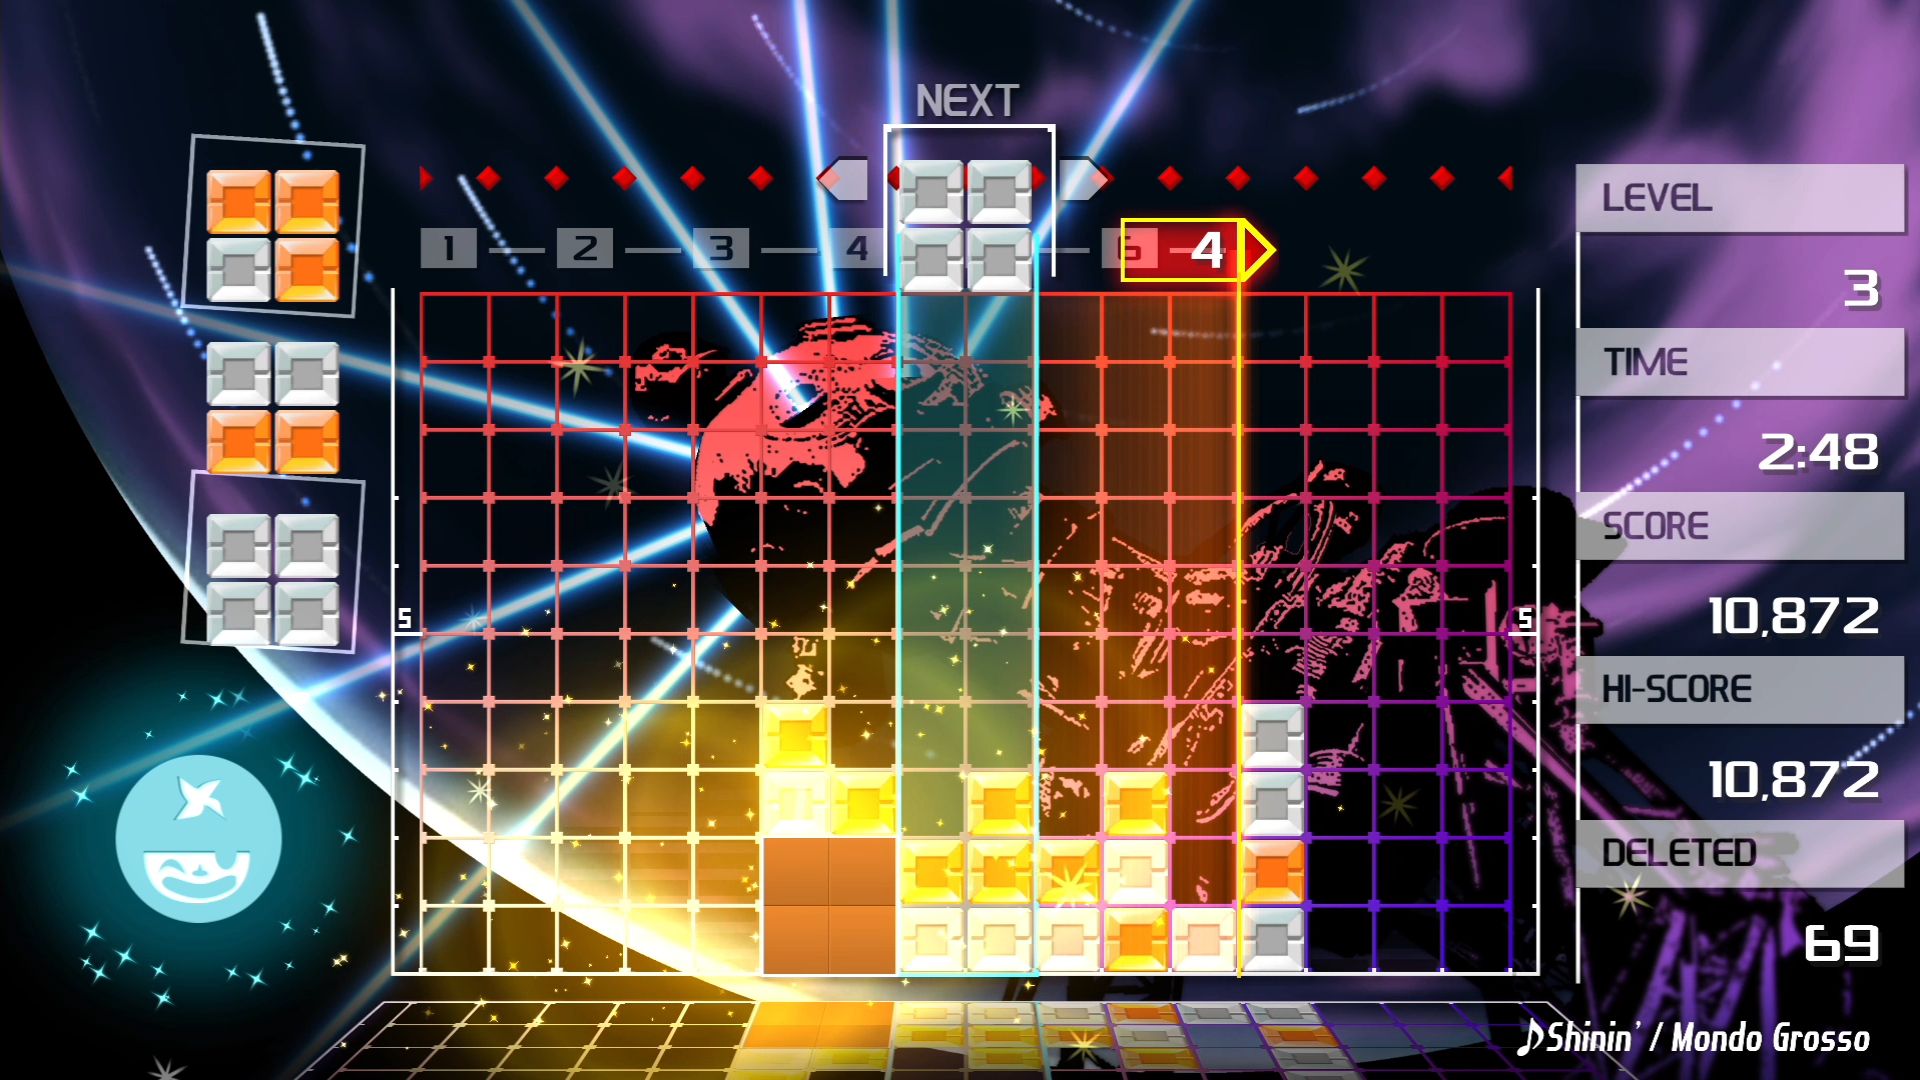 One of the many Tetris games, Lumines (not really a Tetris game but kind of similar). In action it shows various blocks falling along a grid, with numbers at the top denoting the music. It is all very colourful.